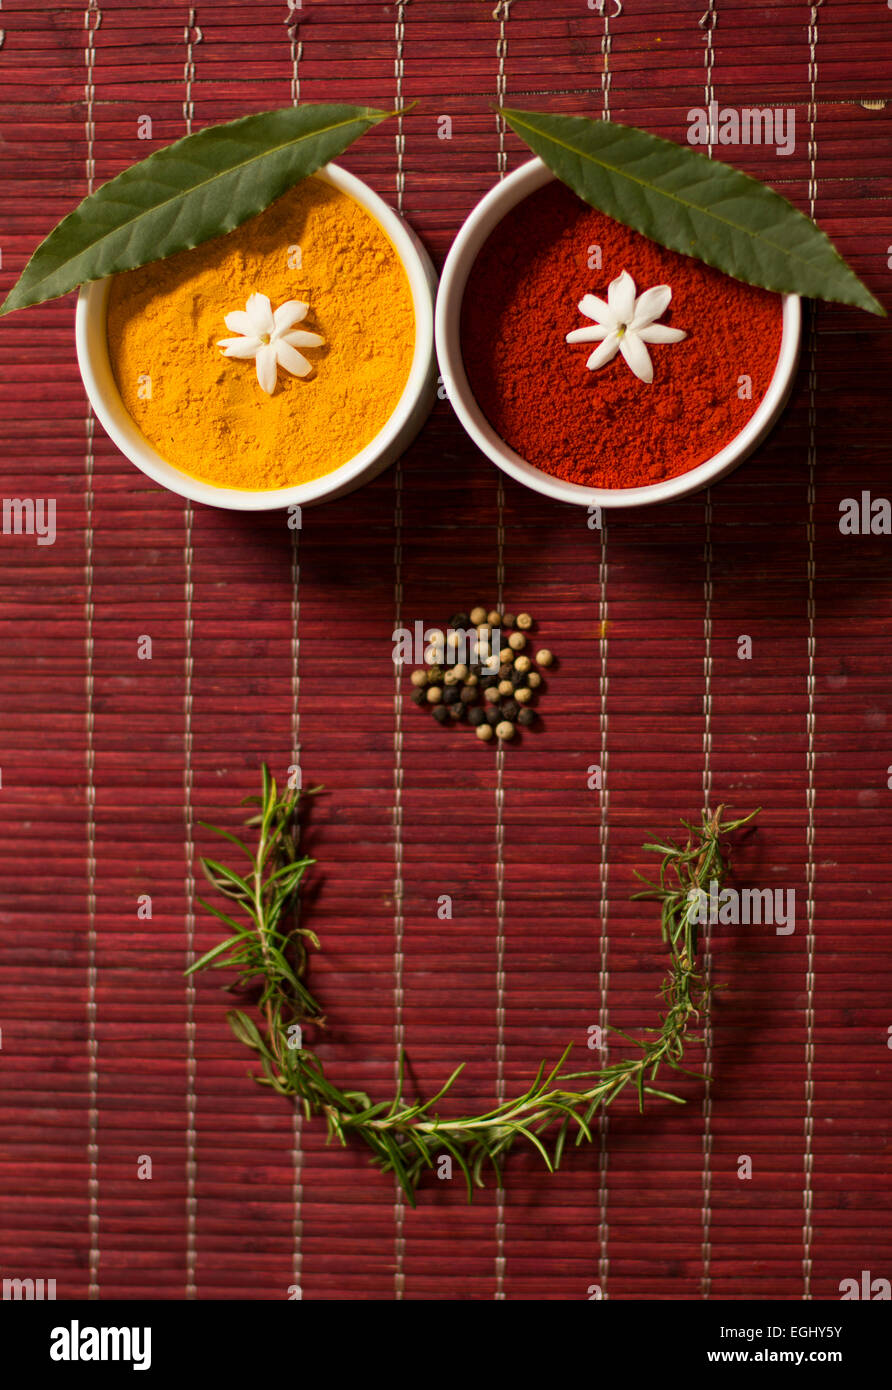 Happy face composed with spices and herbs. Stock Photo